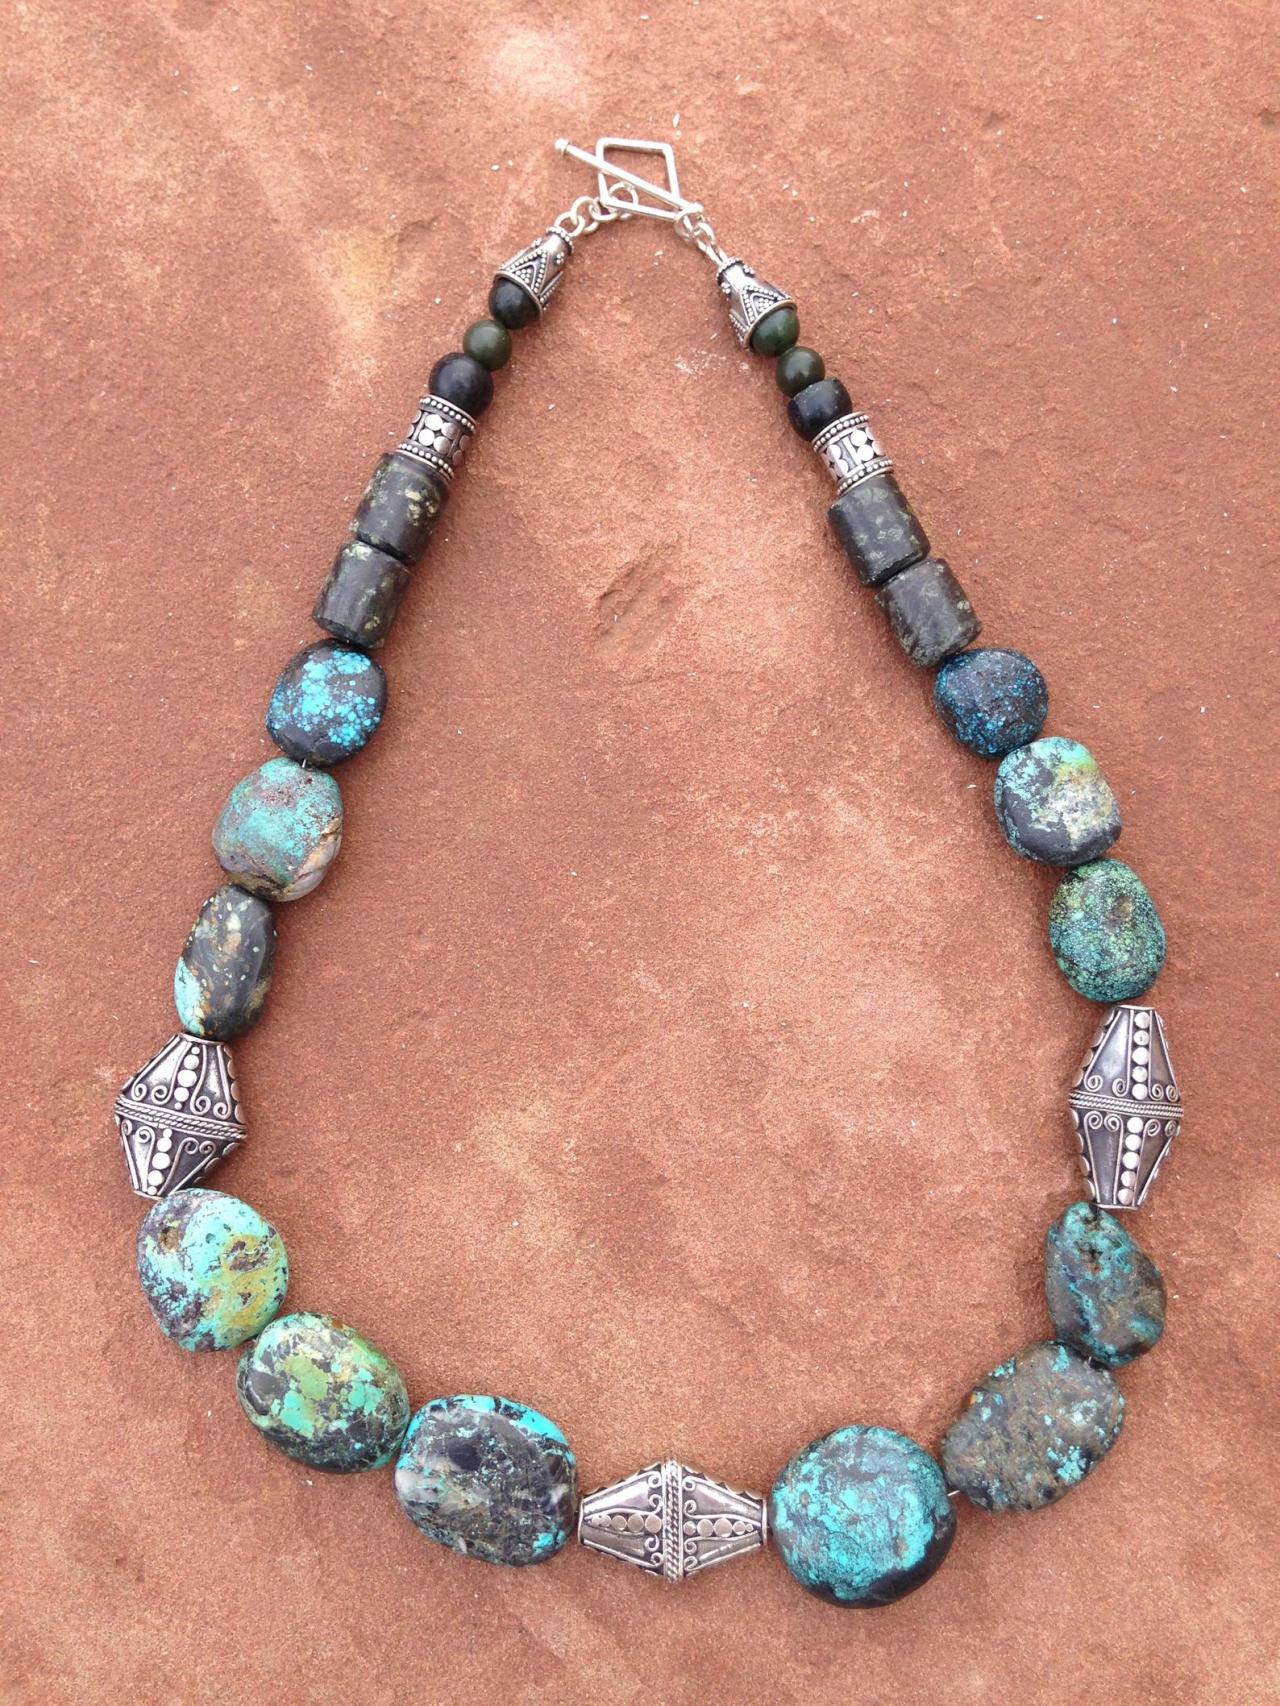 22" Chunky Turquoise And Silver Necklace/ Statement Necklace/turquoise Statement Necklace